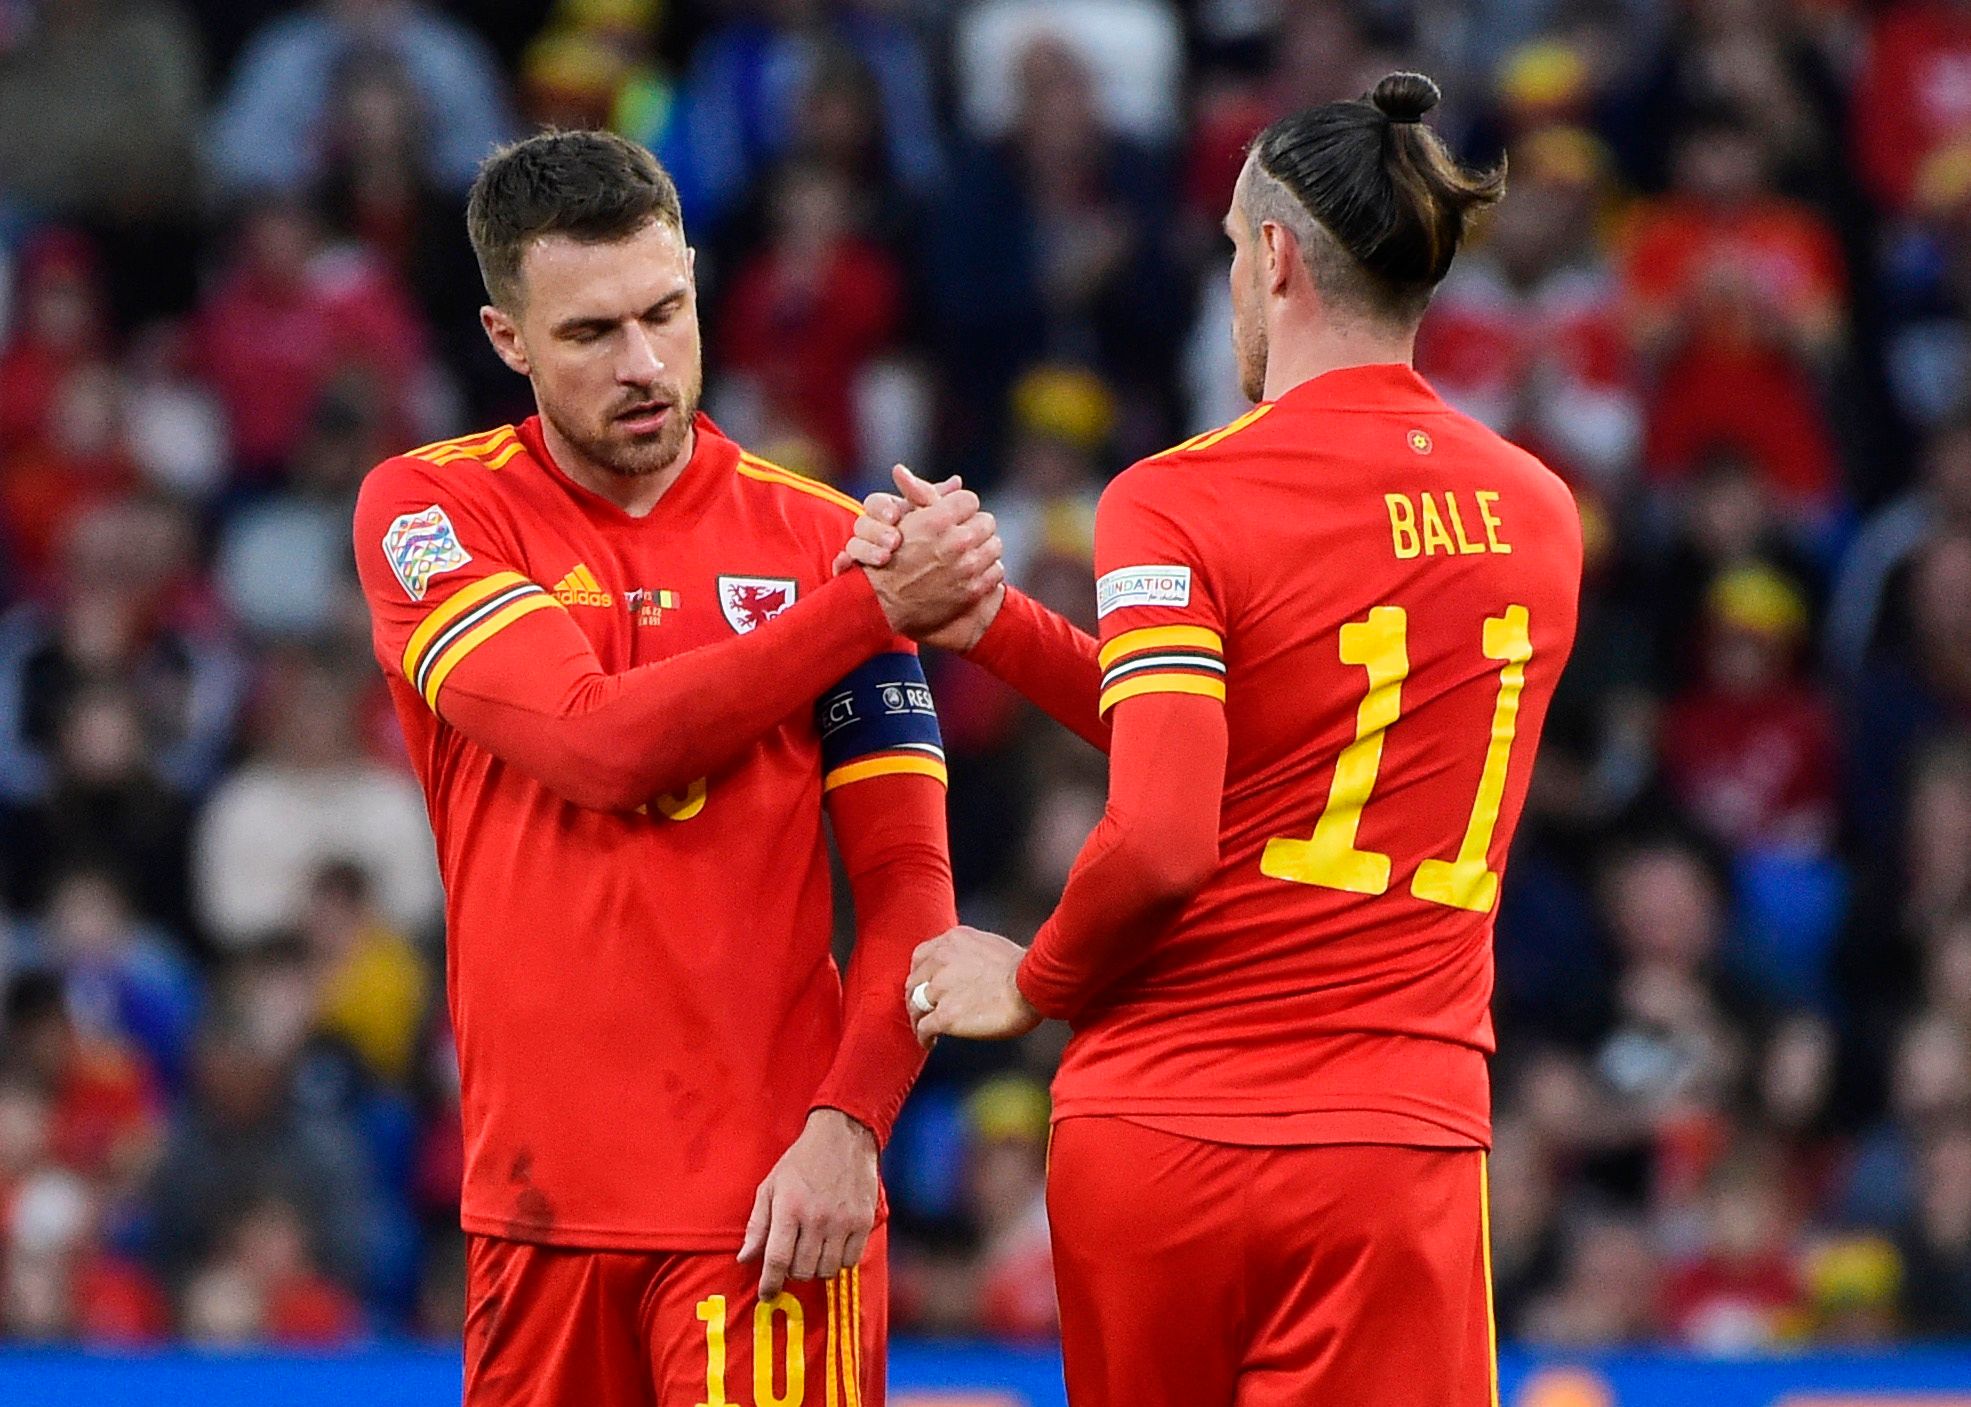 Soccer Football - UEFA Nations League - Group D - Wales v Belgium - Cardiff City Stadium, Cardiff, Wales, Britain - June 11, 2022 Wales' Gareth Bale shakes hands with Aaron Ramsey REUTERS/Rebecca Naden